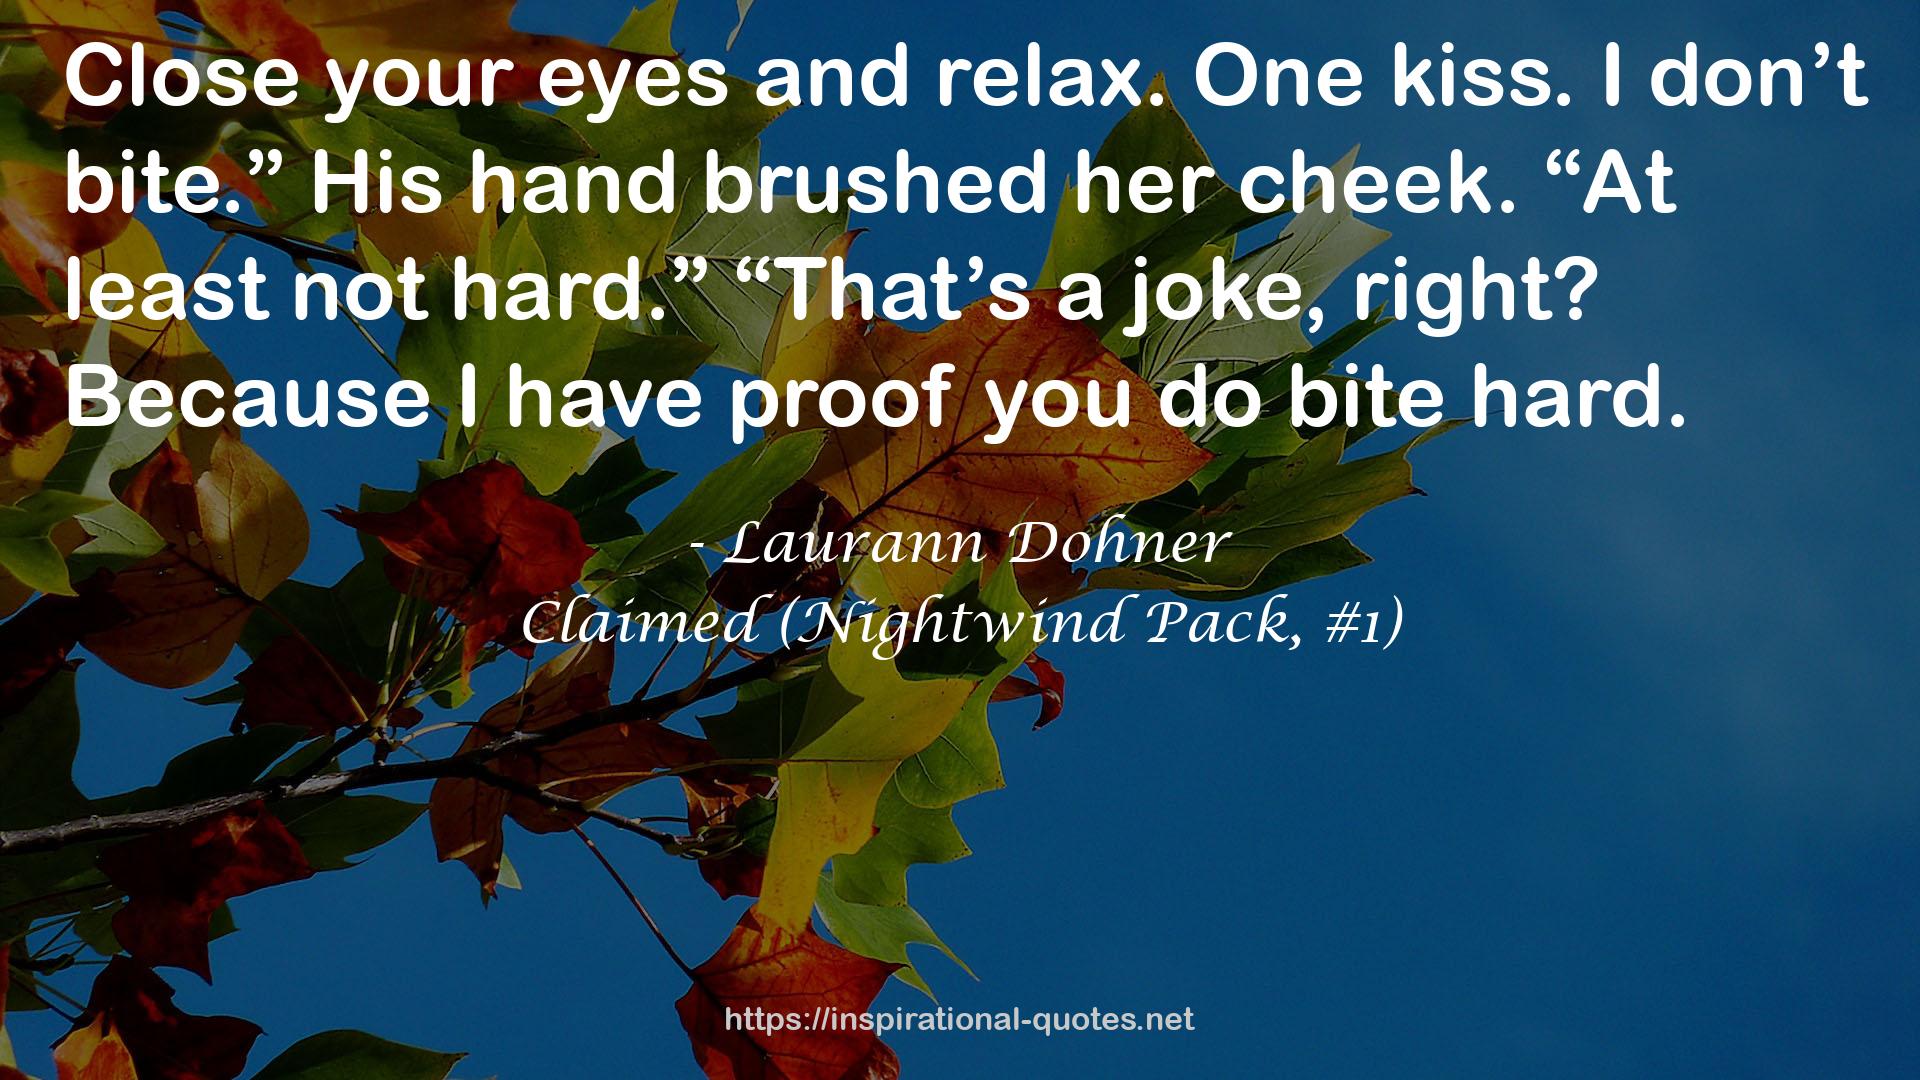 Claimed (Nightwind Pack, #1) QUOTES